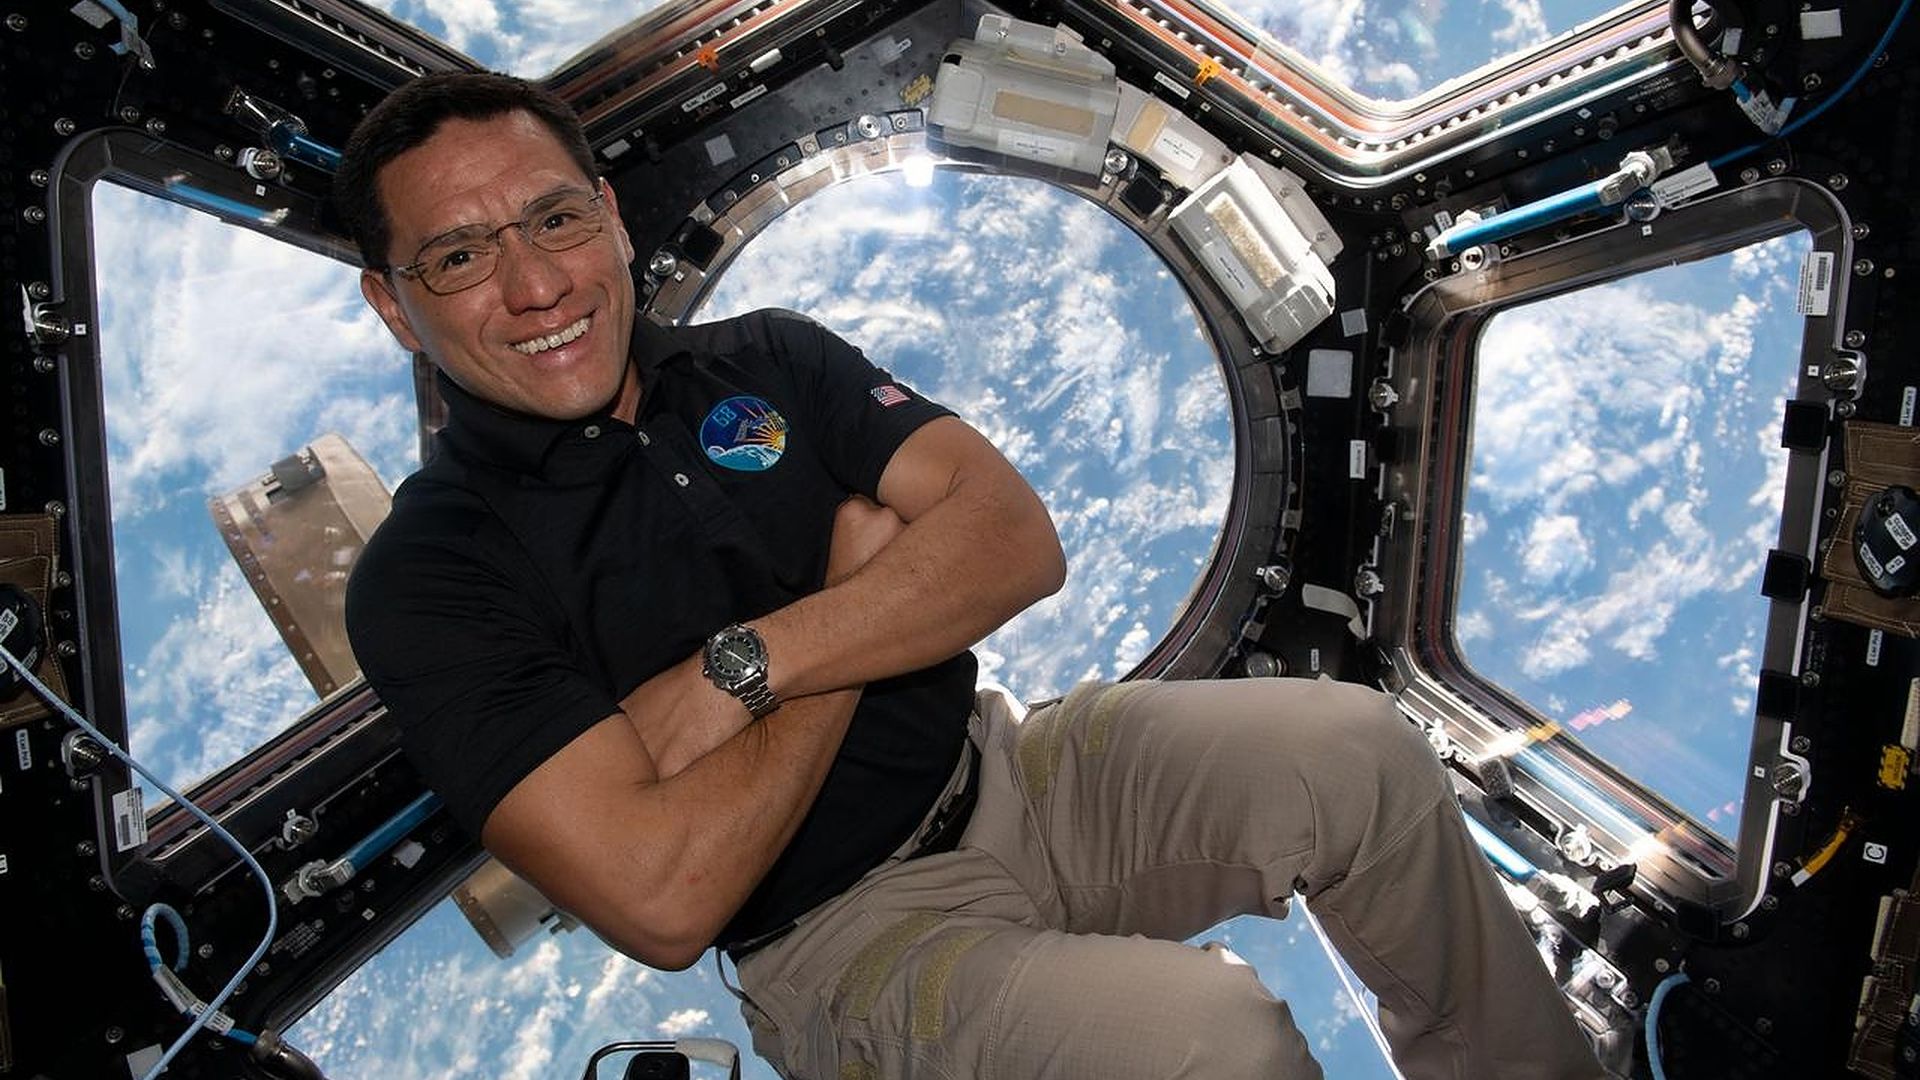 NASA Astronaut Frank Rubio smiles in a space shuttle in space.